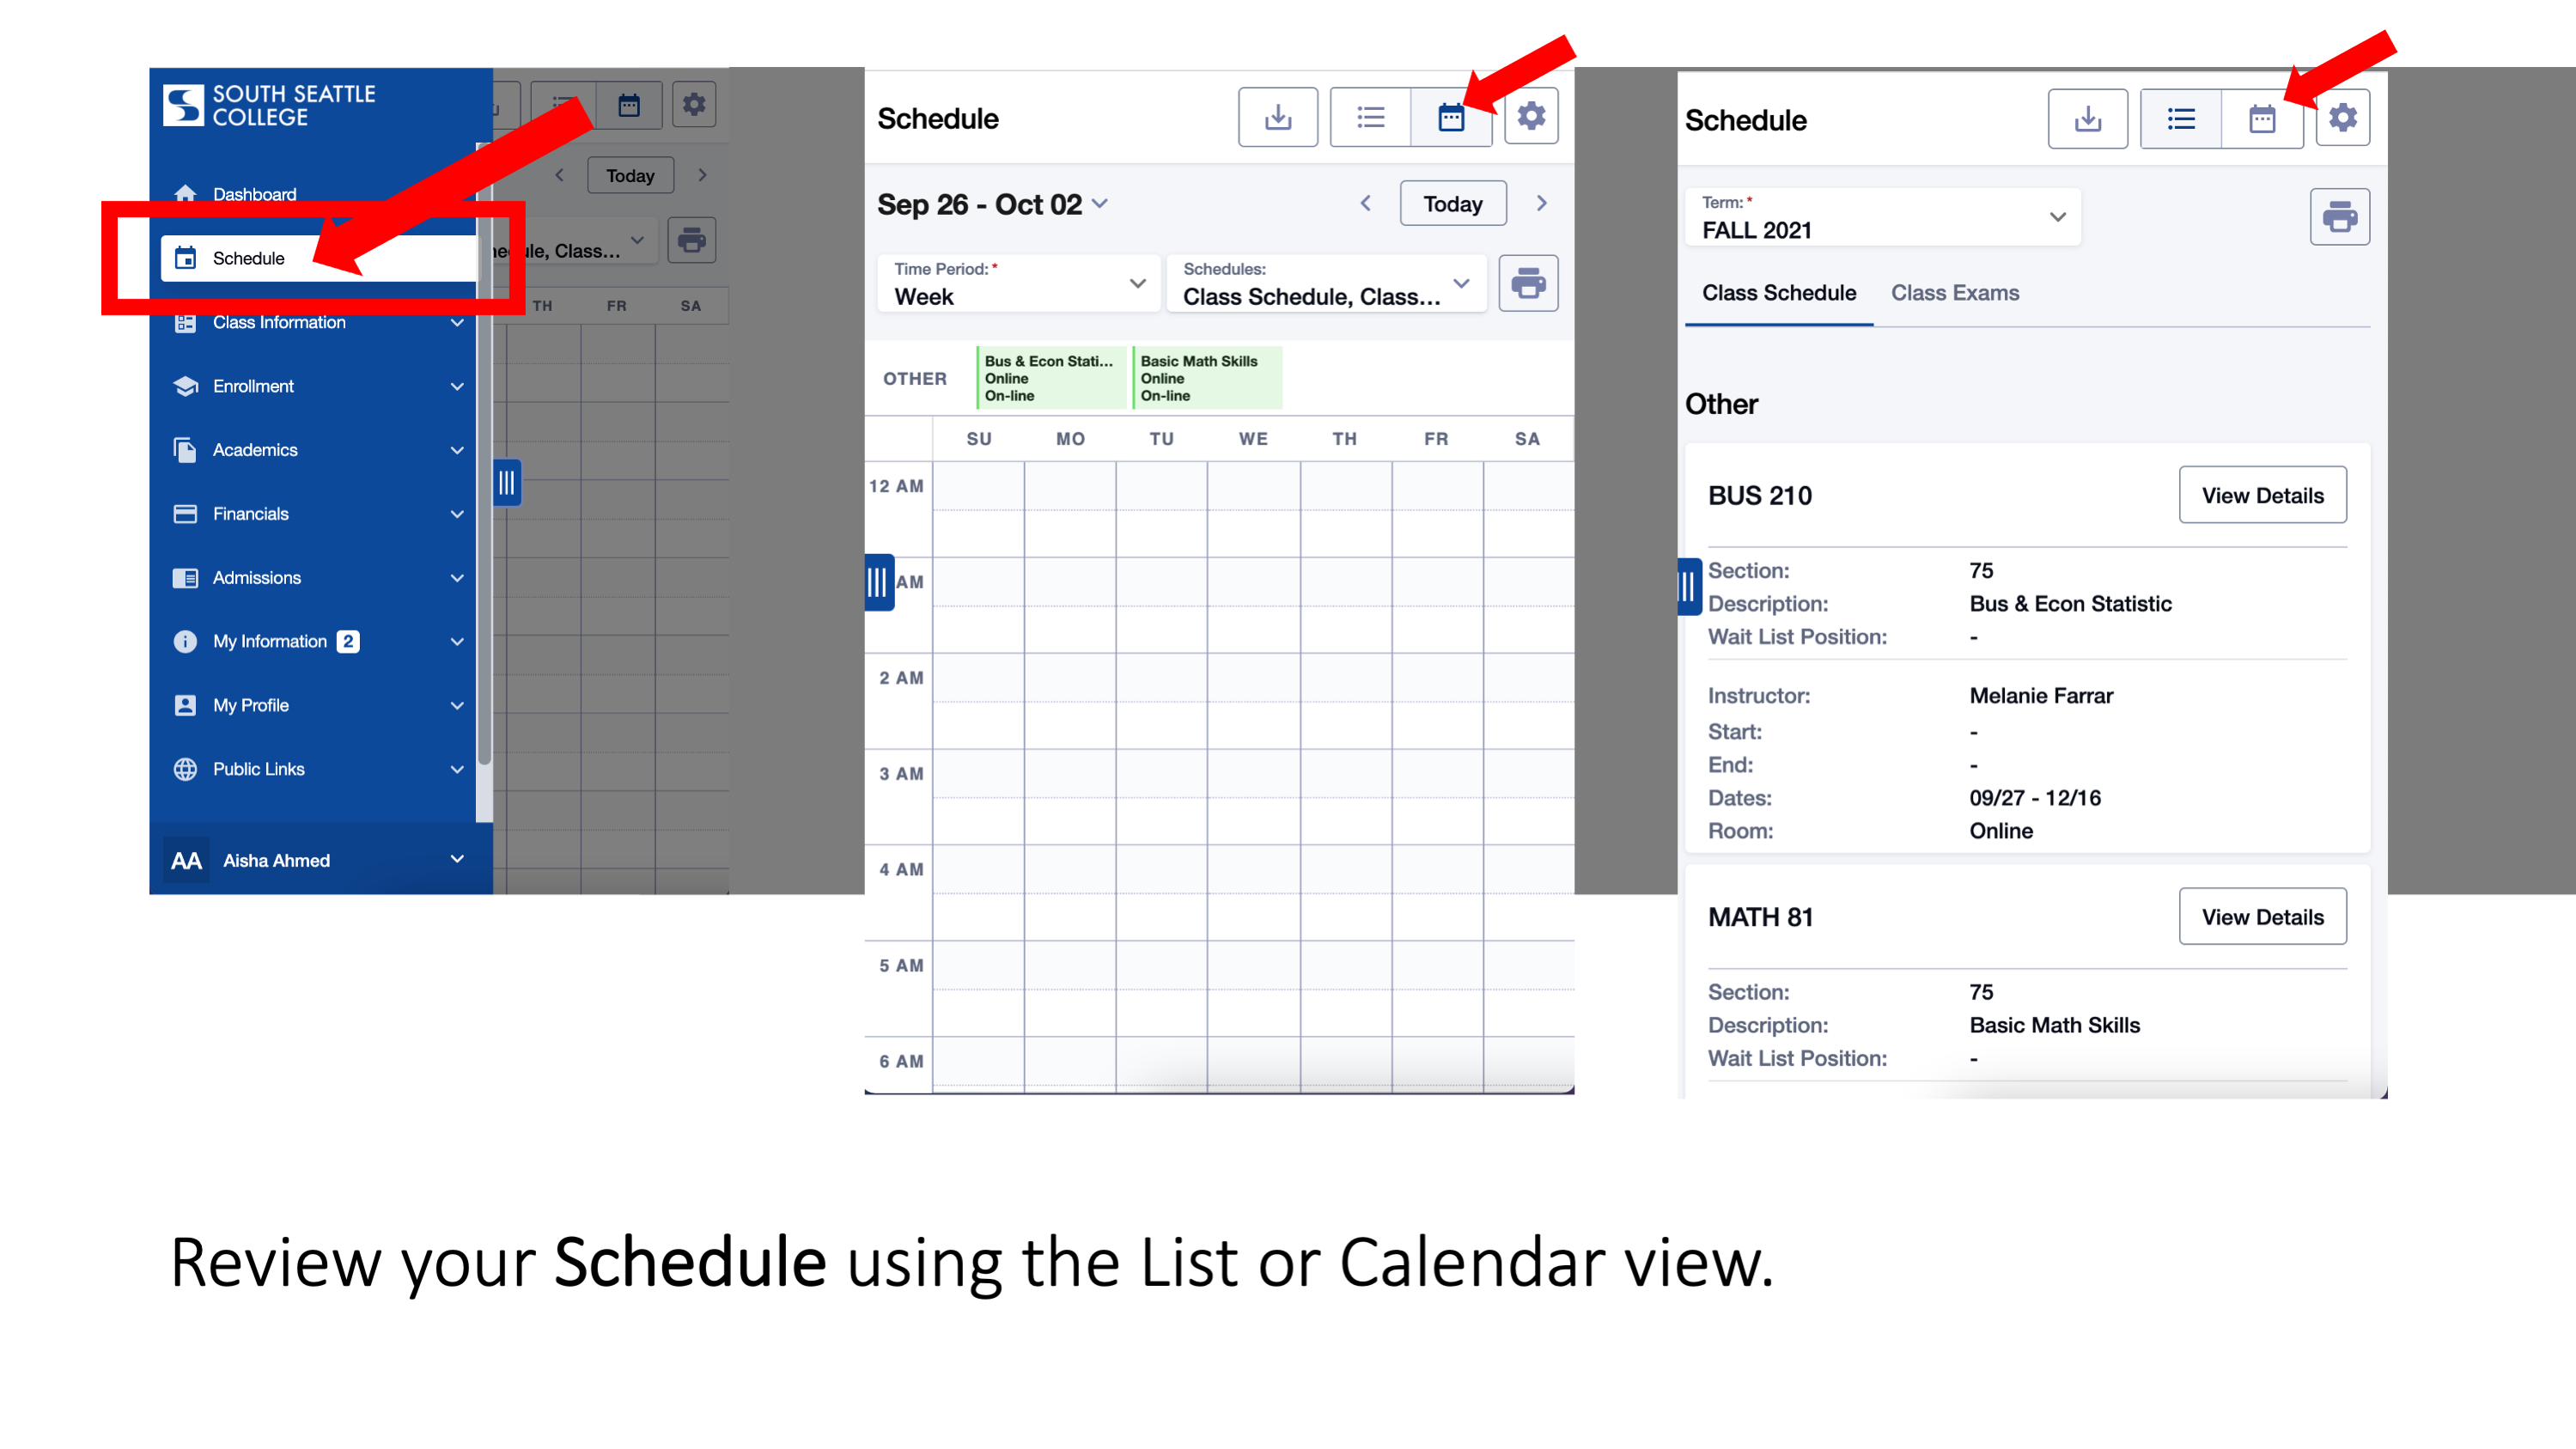 Review your Schedule using the List or Calendar view.